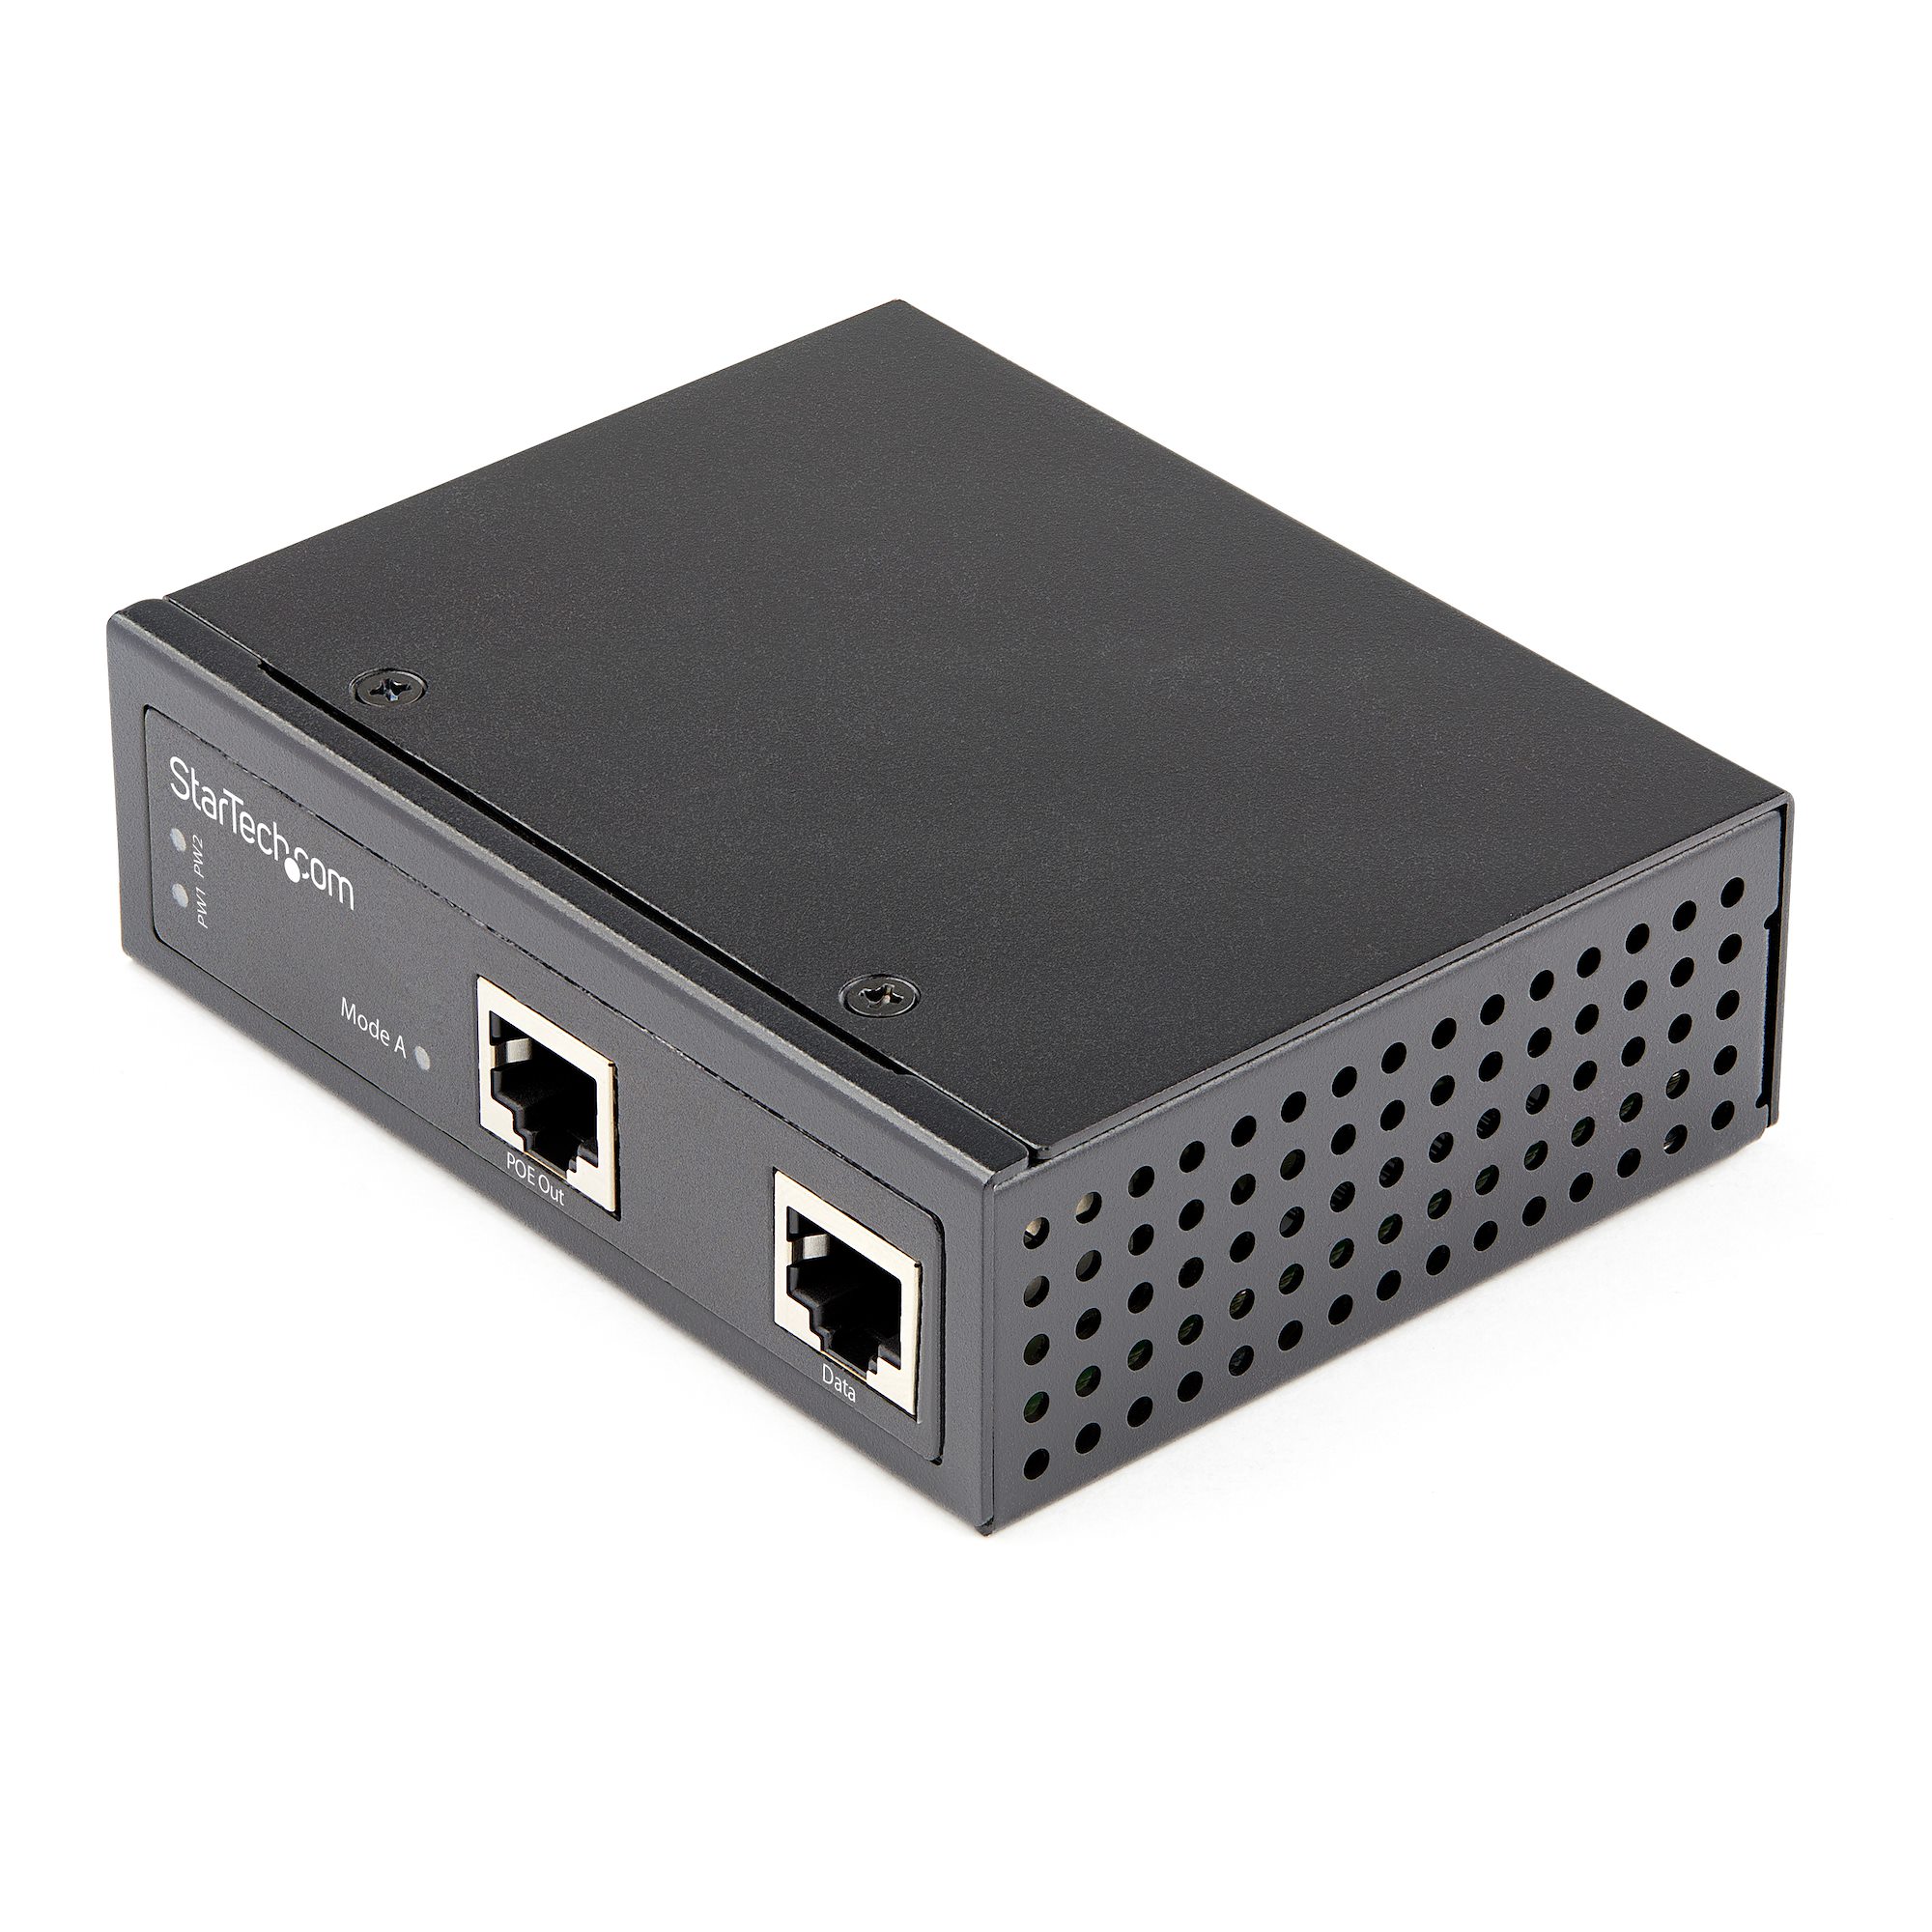 PoE Switch Vs. PoE Injector: Which One to Choose?